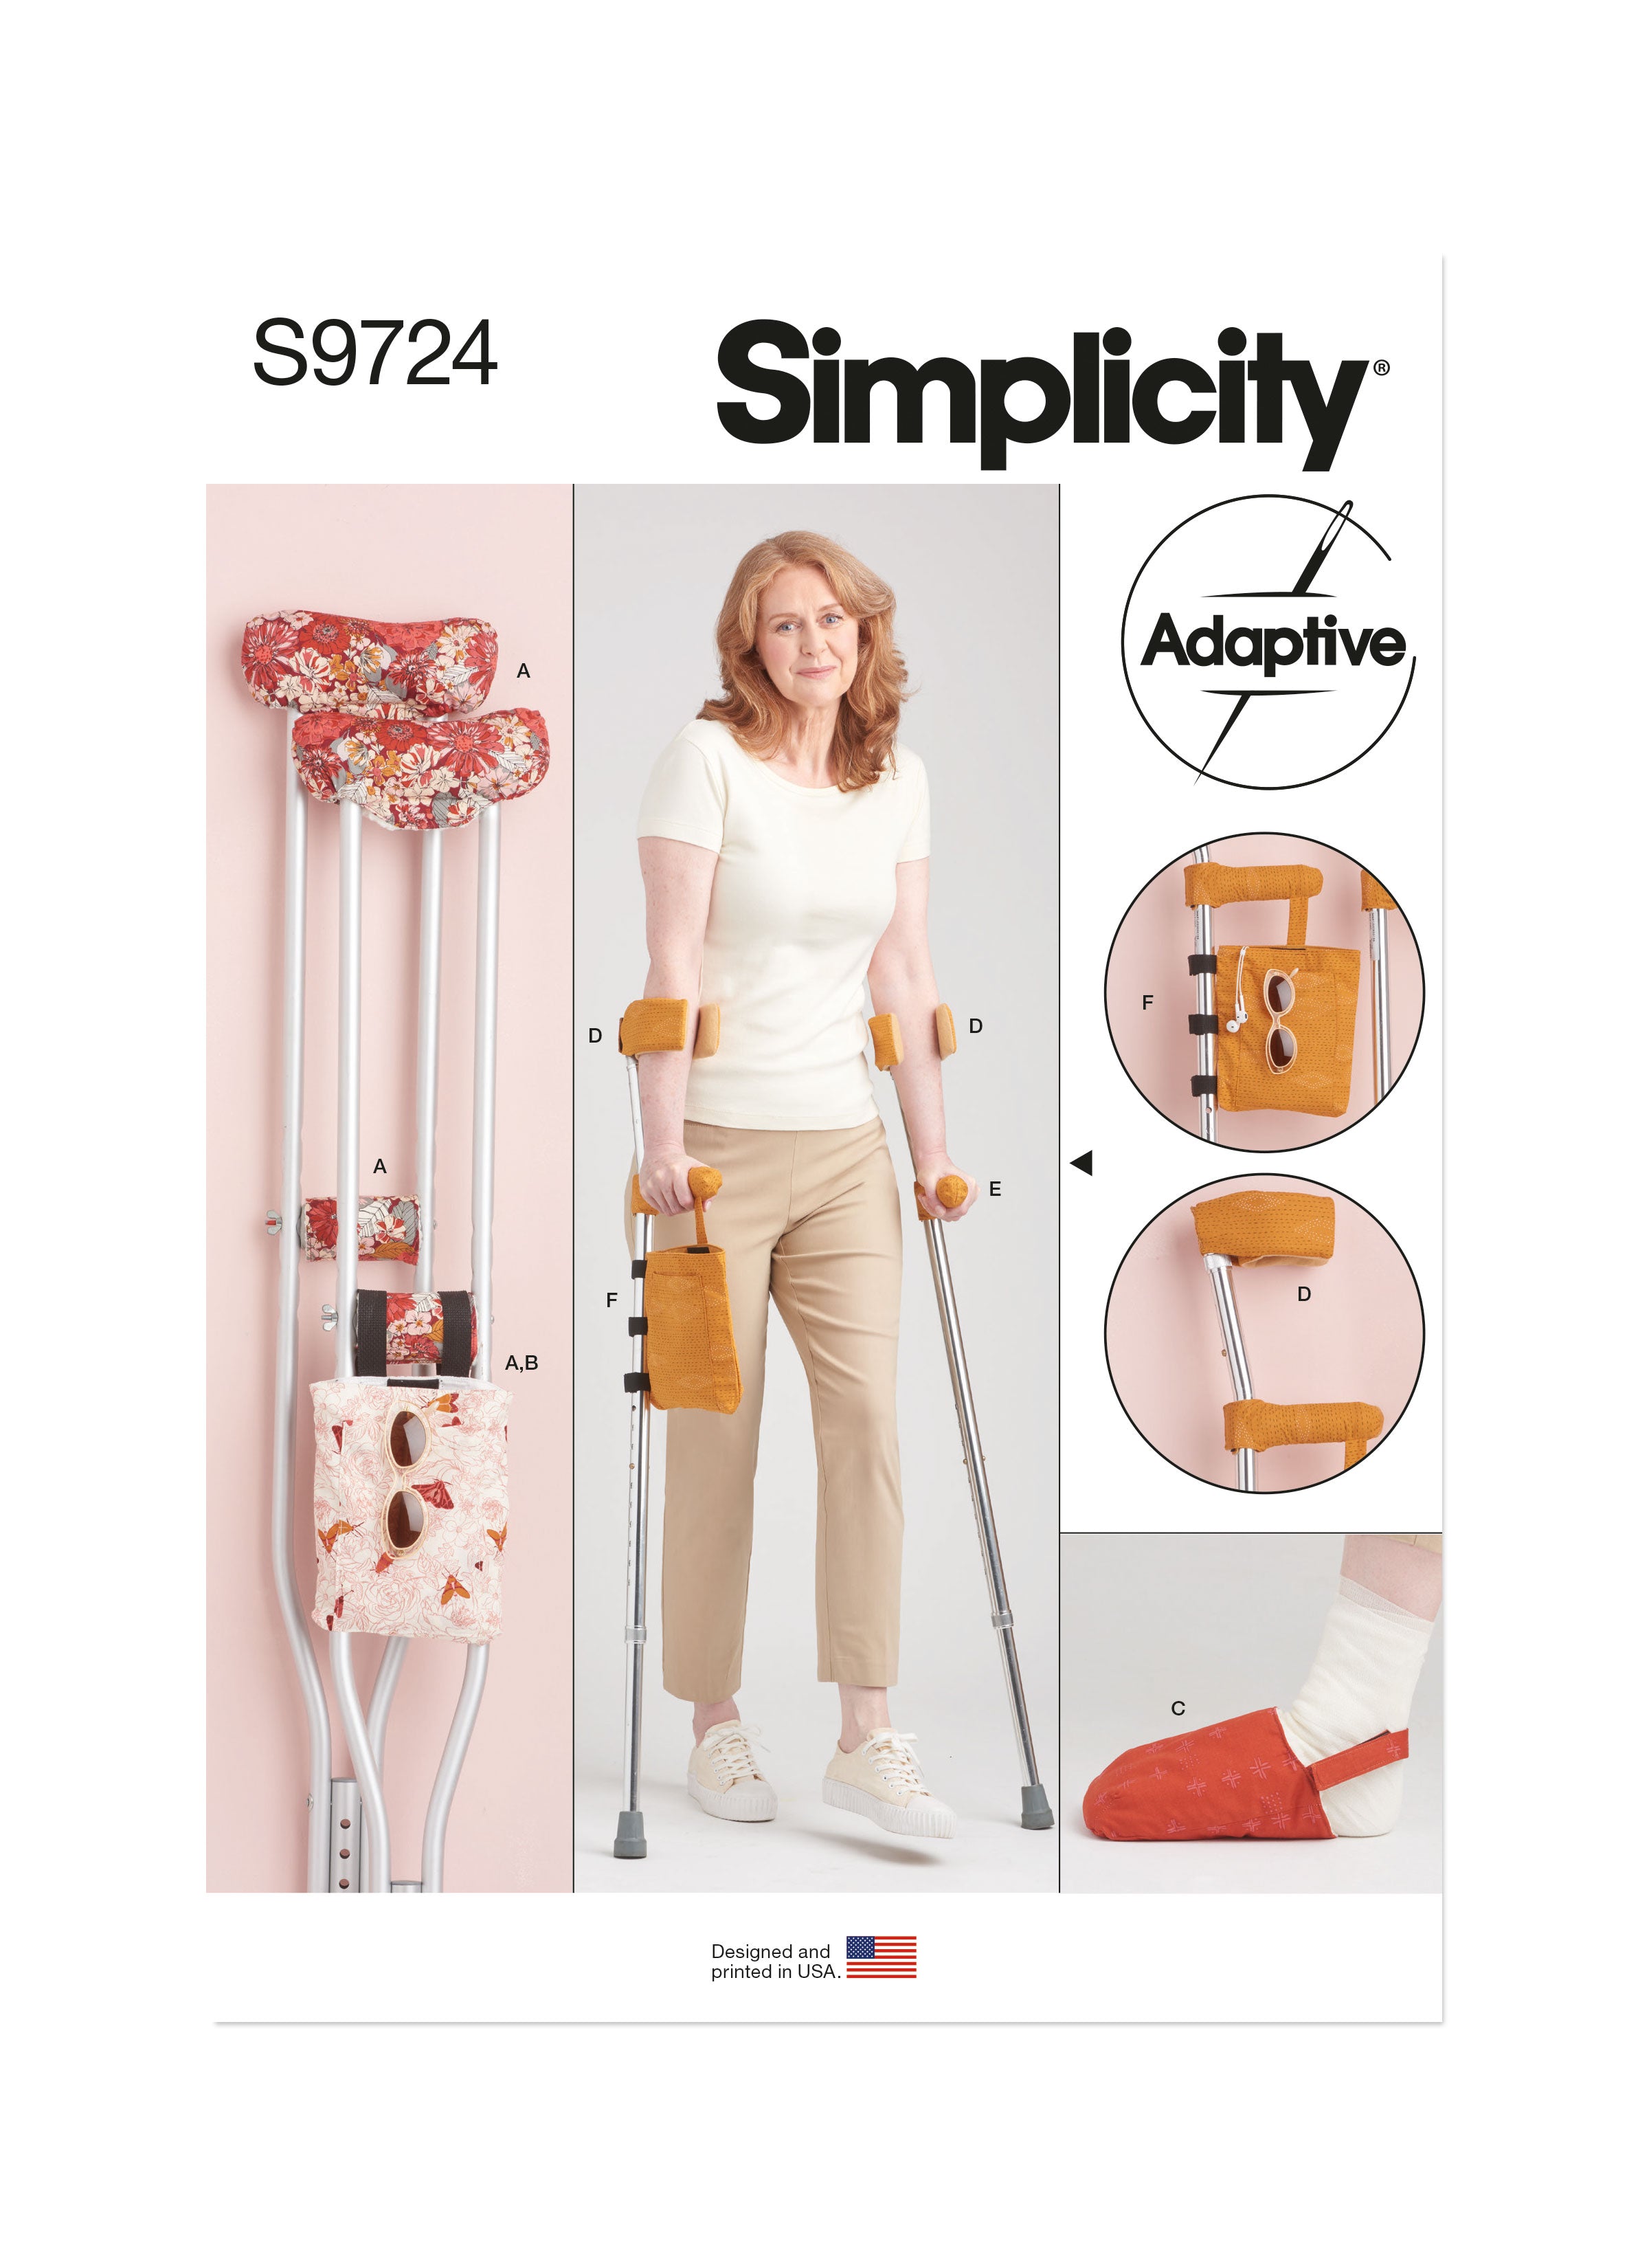 Simplicity 9724 Crutch Pads, Bag and Toe Cover Sewing pattern from Jaycotts Sewing Supplies